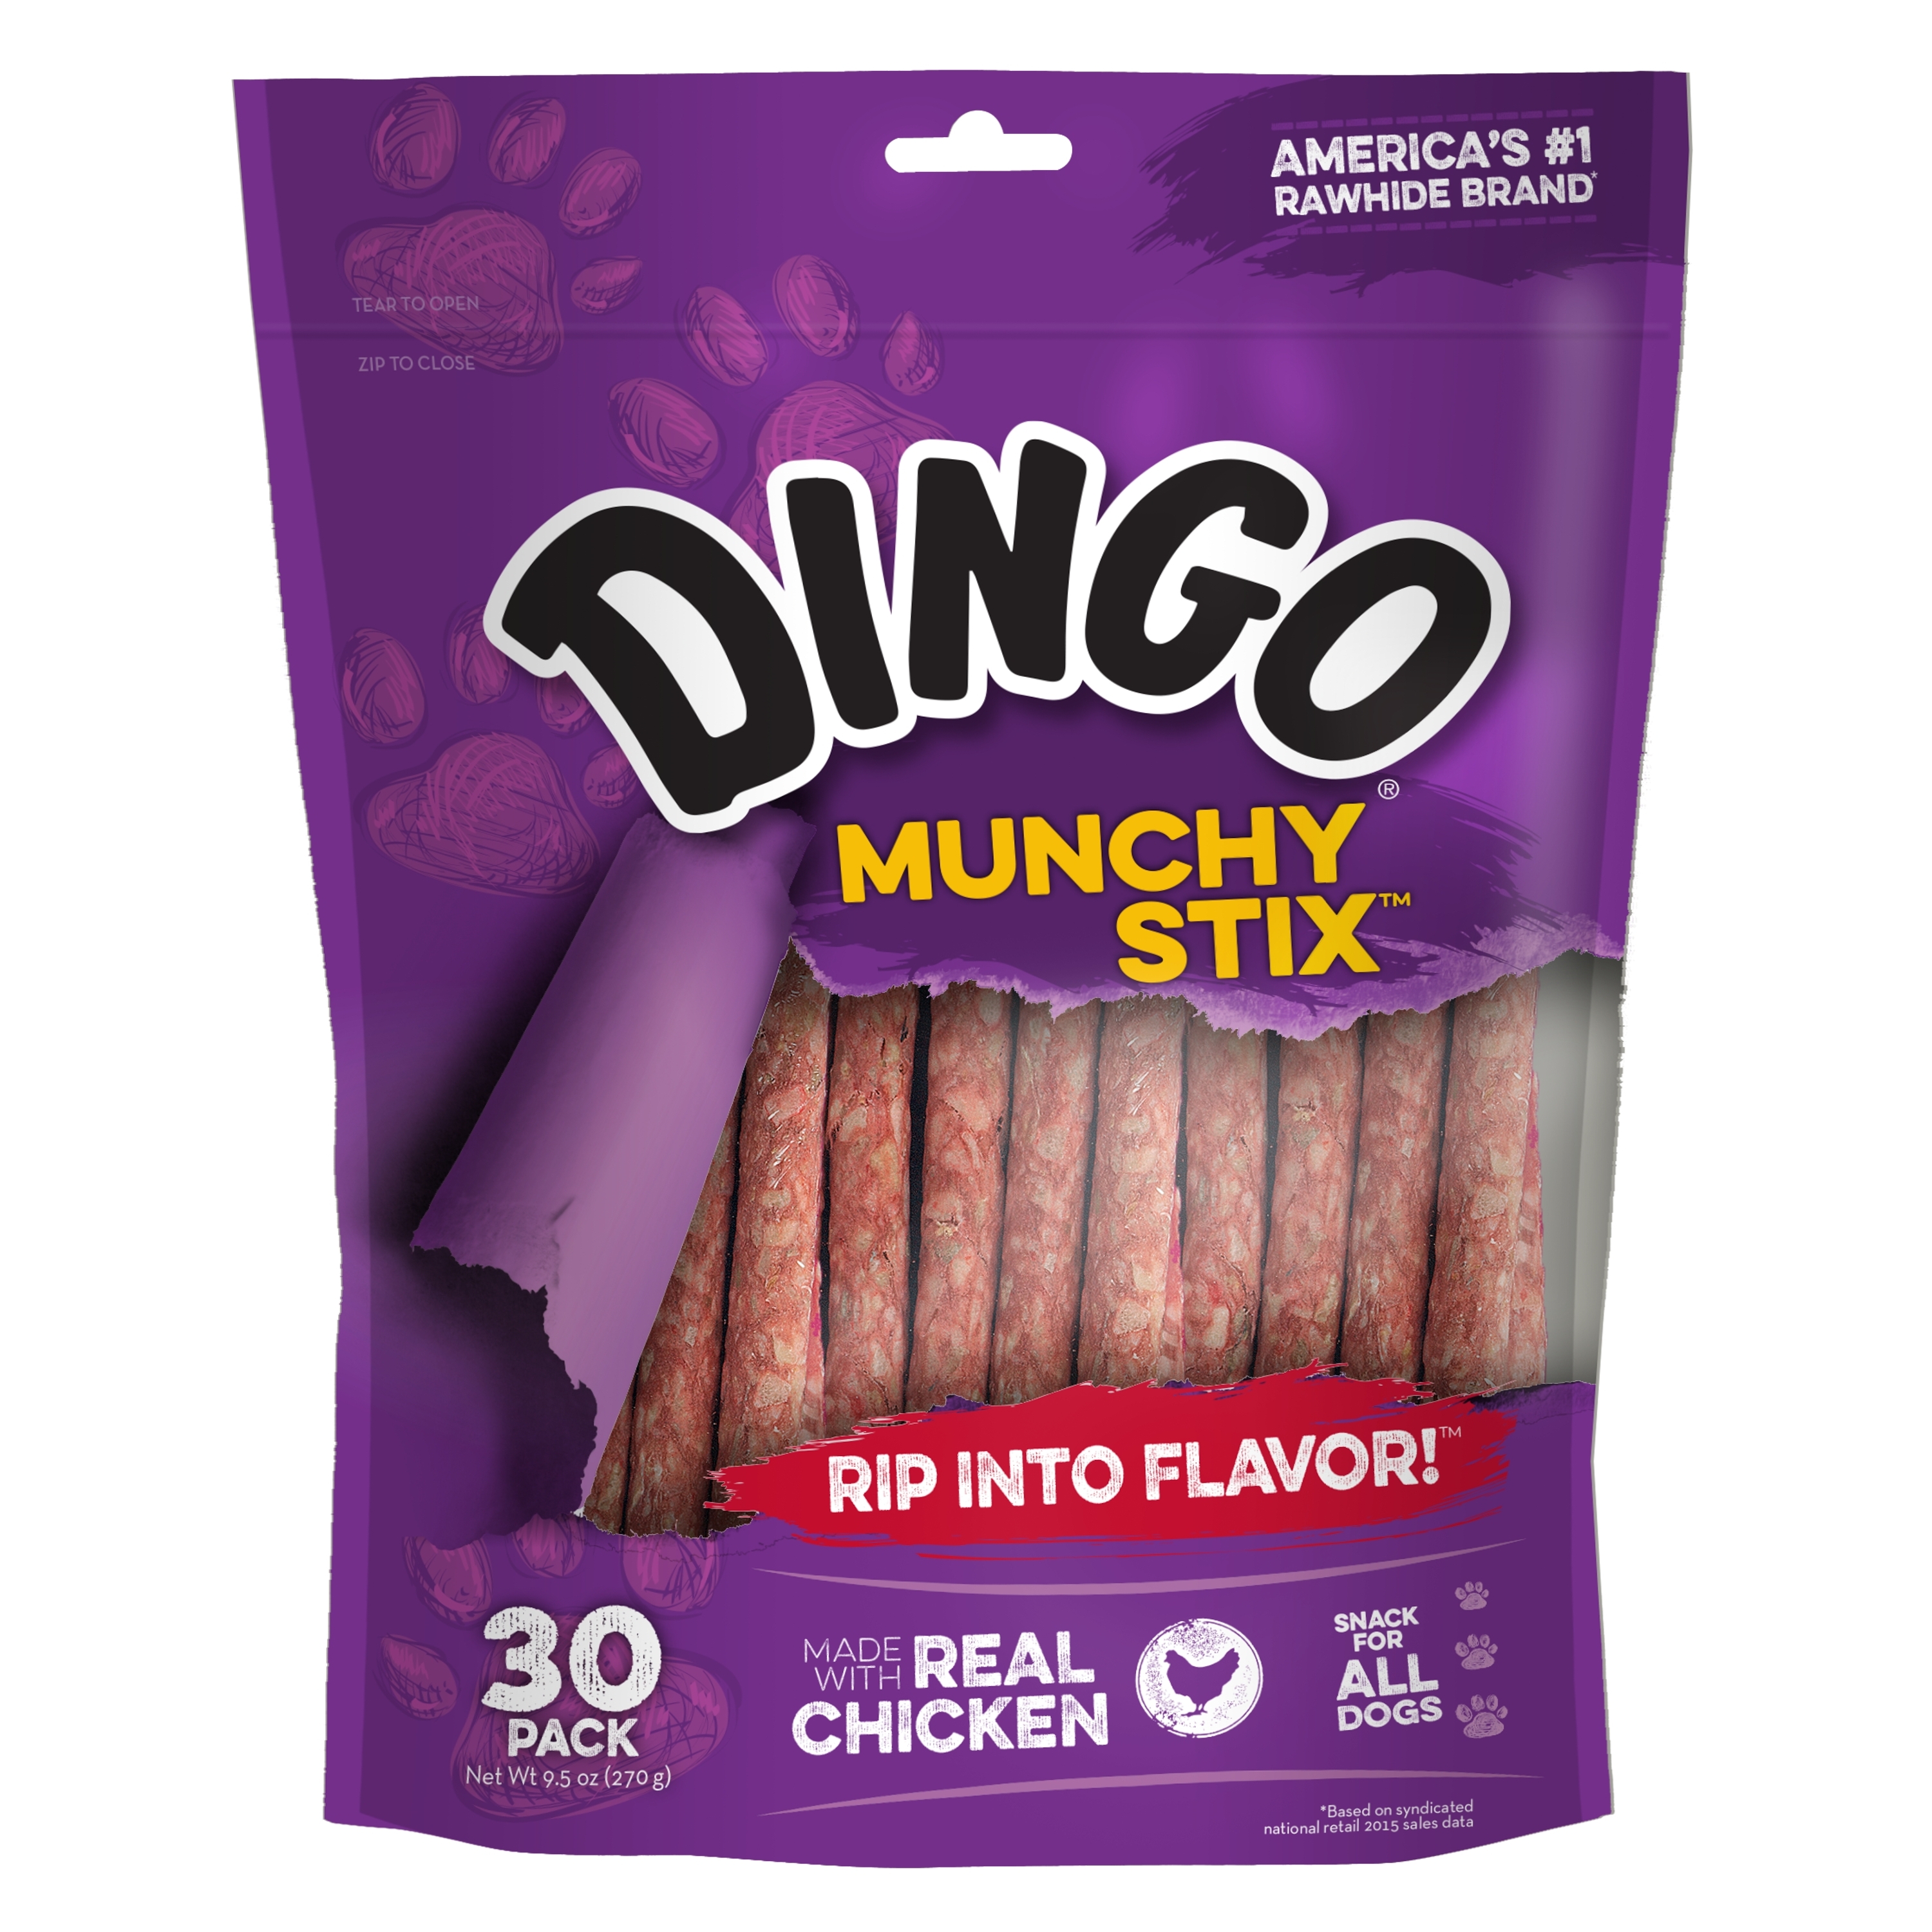 Dingo Munchy Stix Rawhide and Chicken Dog Treats, 30-Count - image 1 of 6